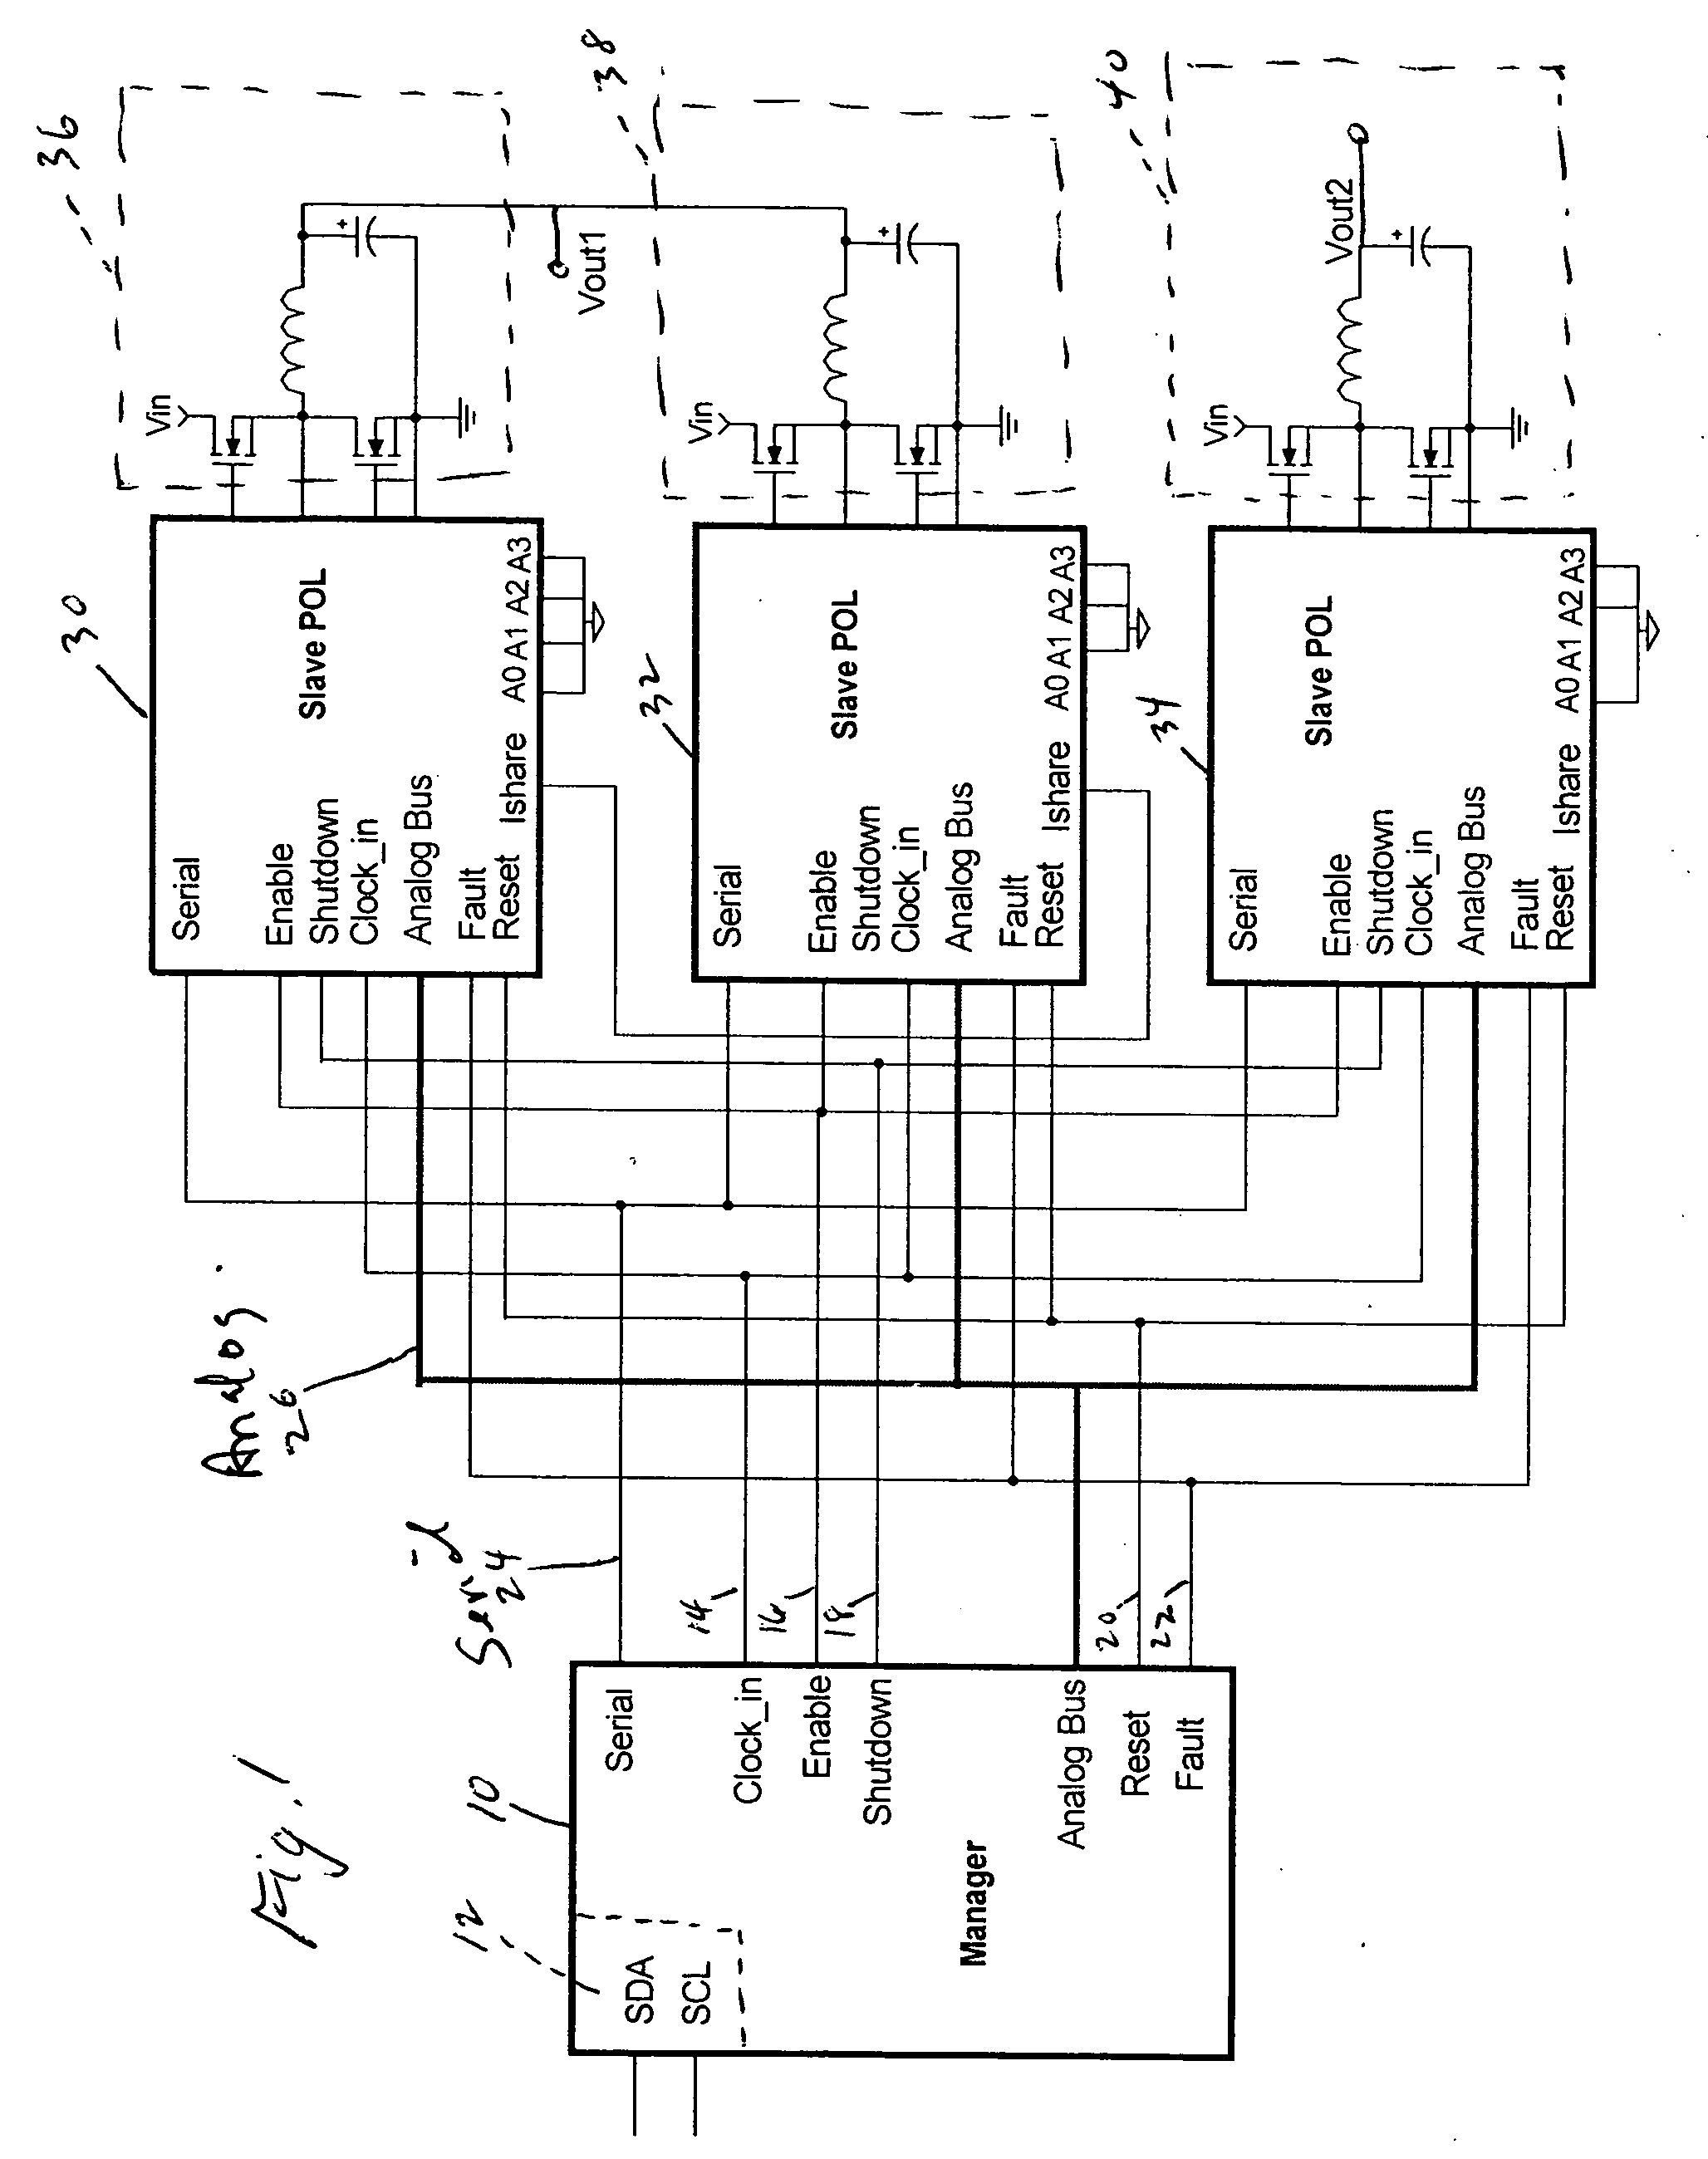 Pol system architecture with analog bus